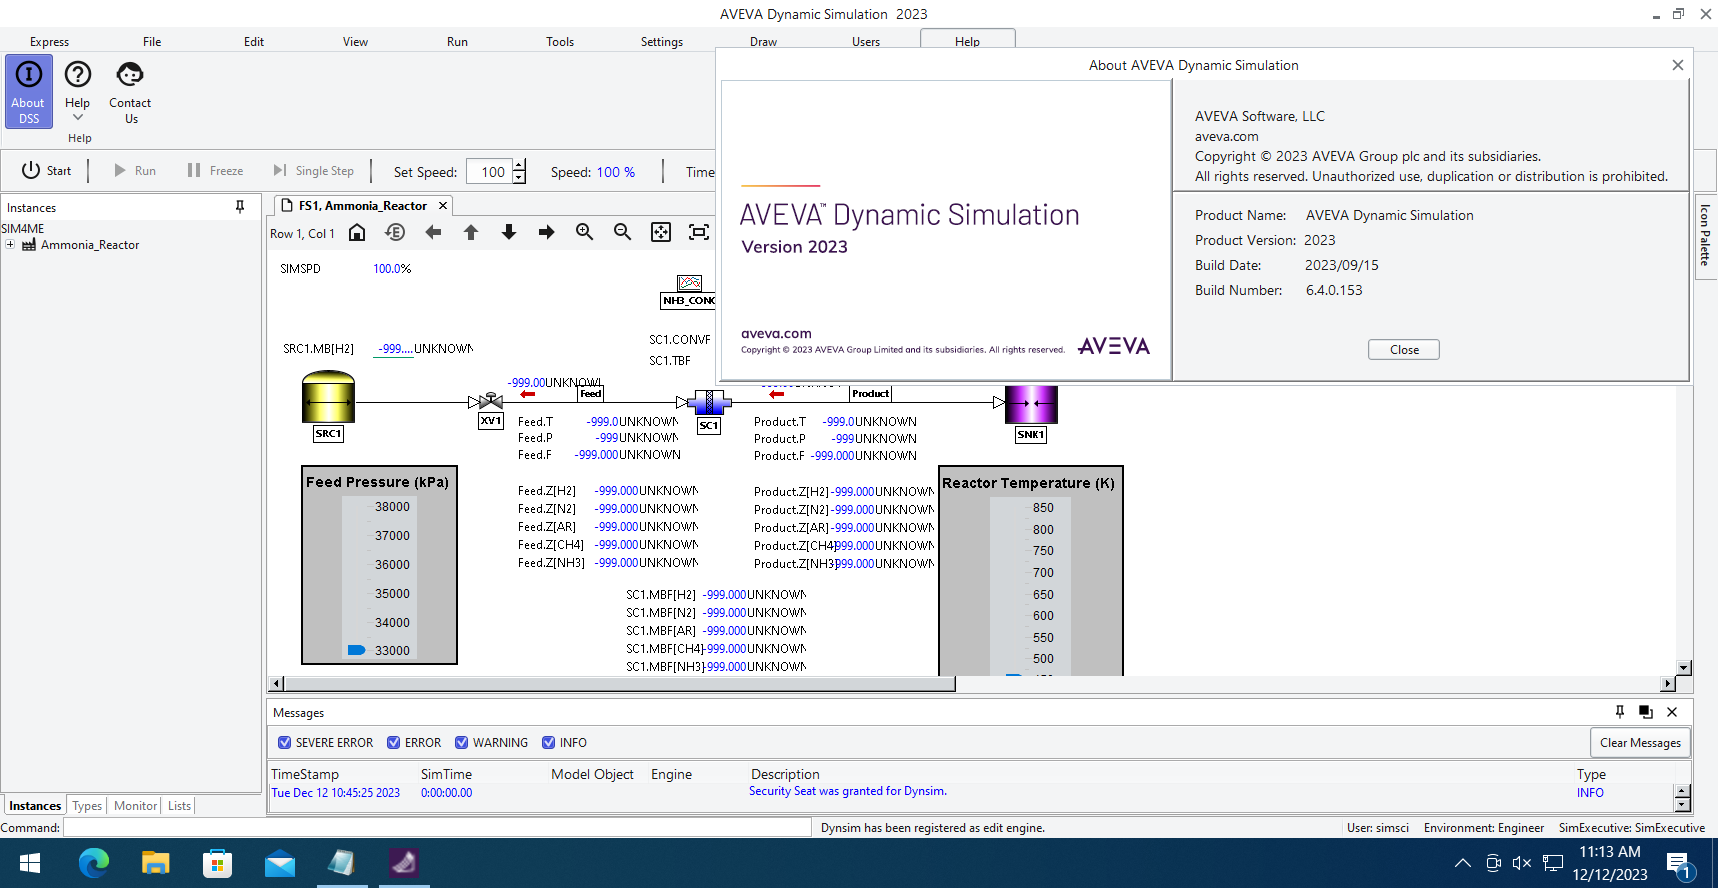 Working with AVEVA Dynamic Simulation 2023 full license